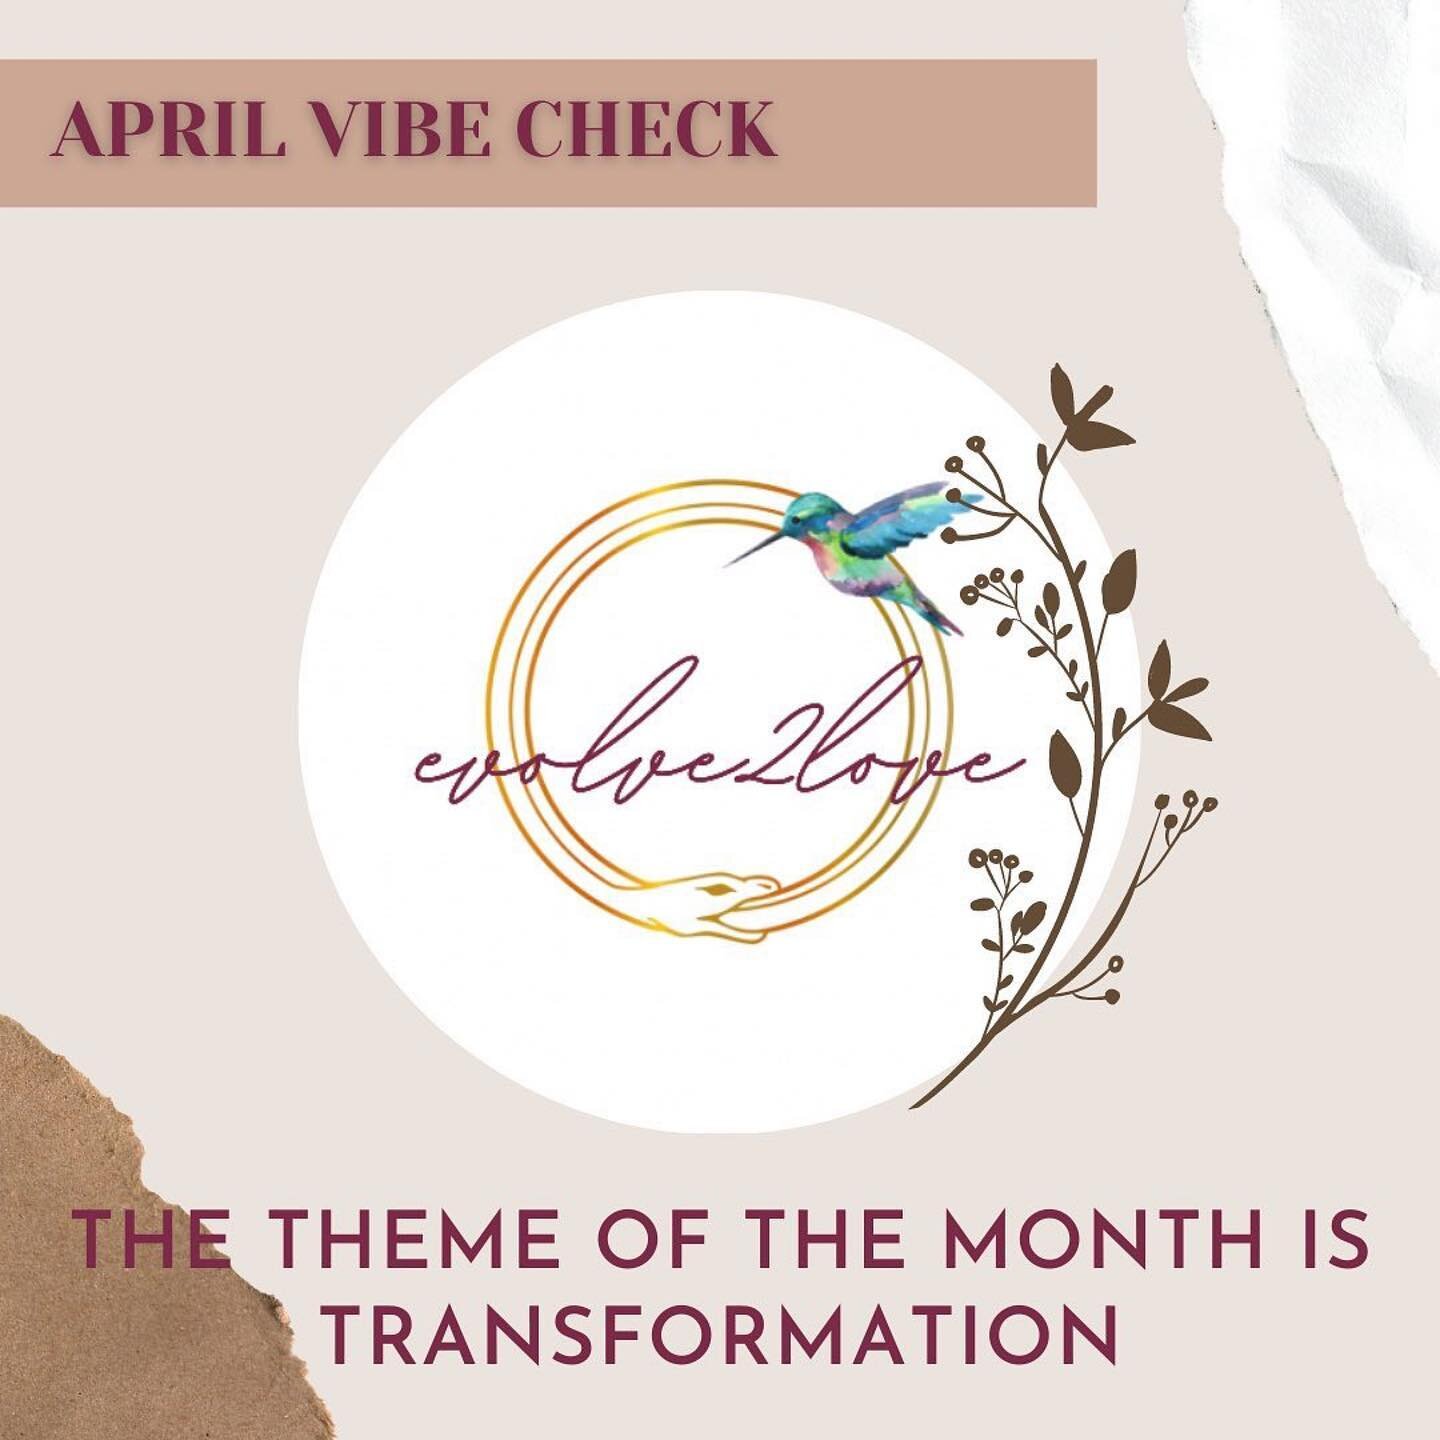 It&rsquo;s almost mid-month: how we doing?

✨VIBE CHECK✨

&ldquo;Keep remembering, keep leaning in, keep surrendering to the path that your soul is leading you down.&rdquo;
- Message from the Akasha 

I spent the day tuning into the energies of April